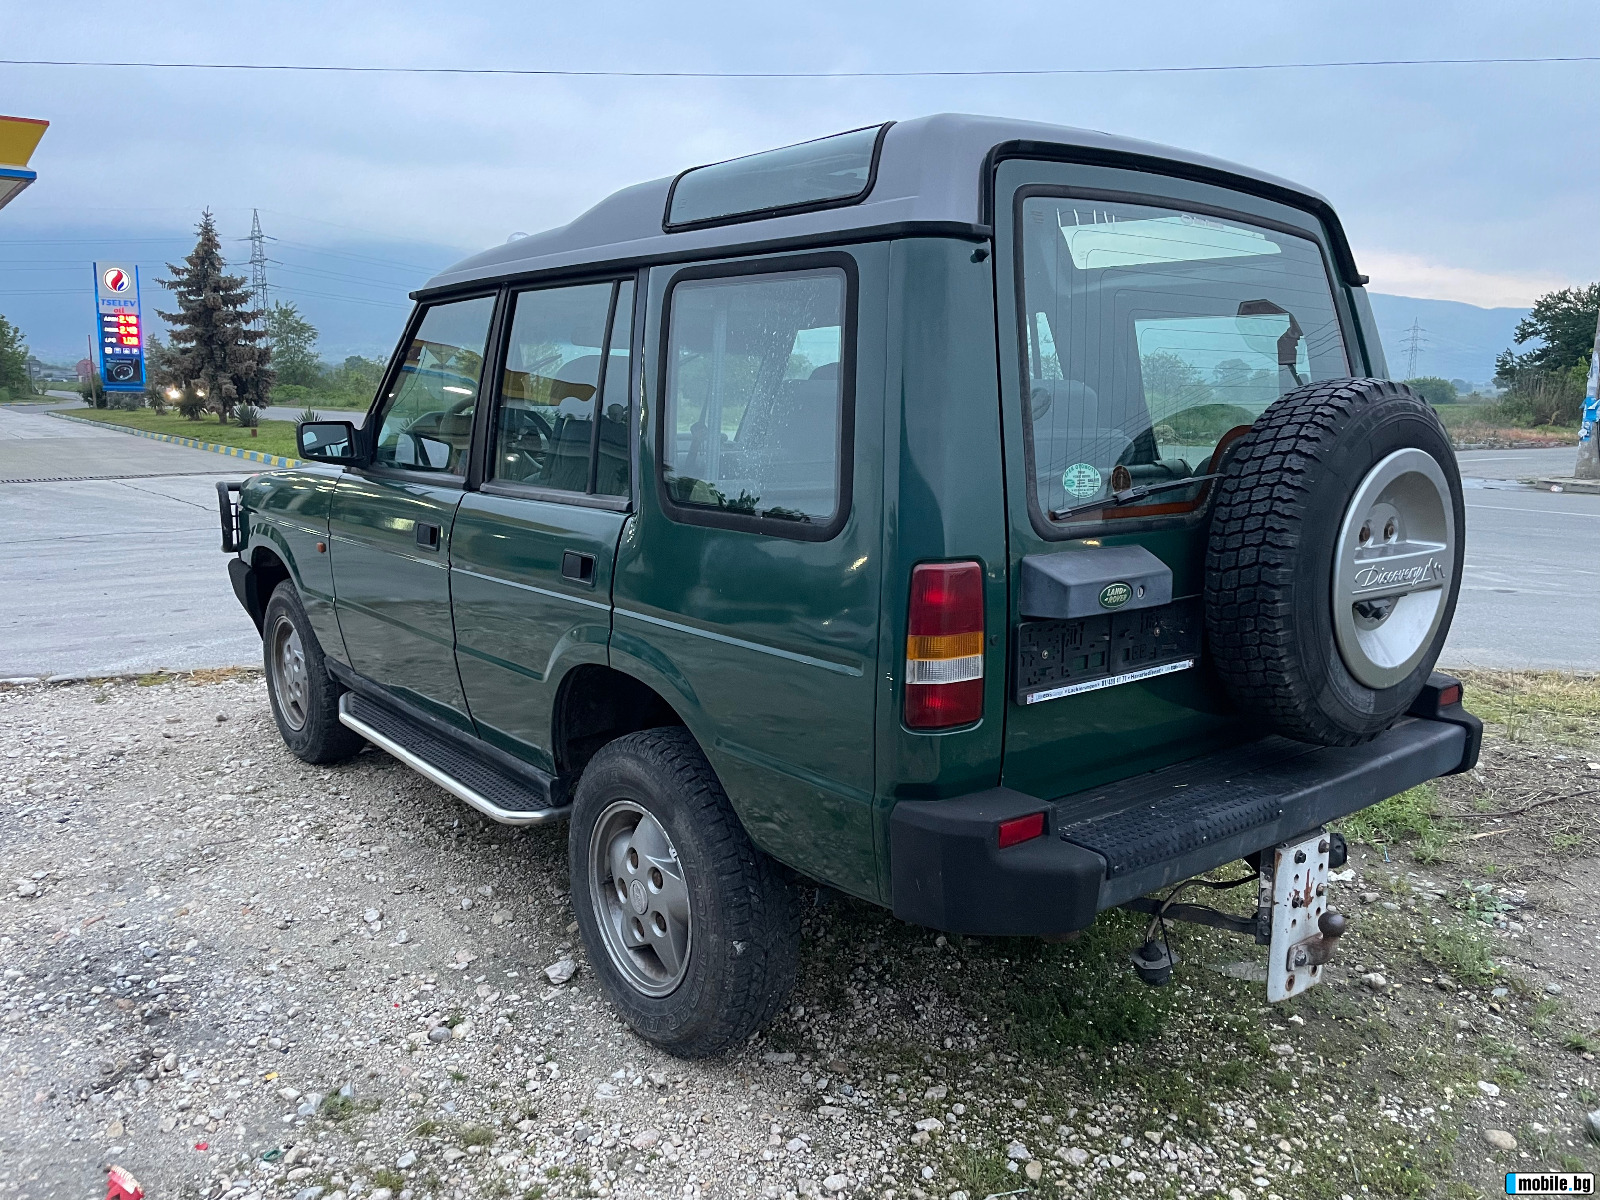 Land Rover Discovery 2.5tdi | Mobile.bg   5